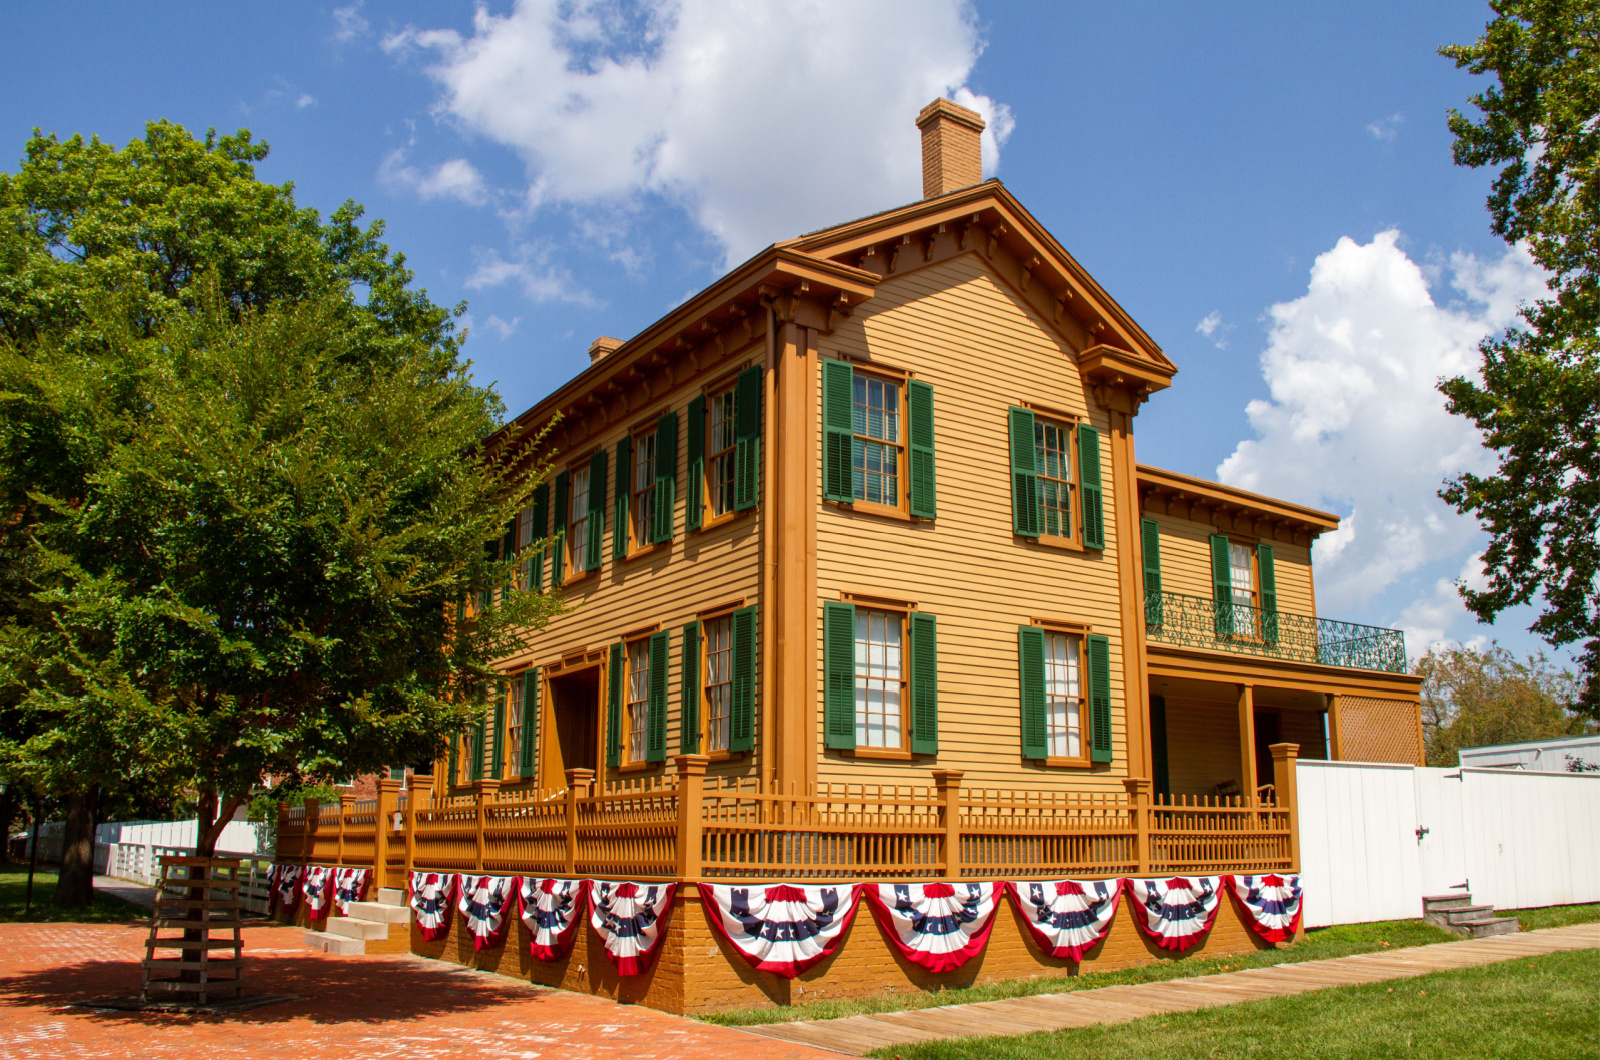 Abraham Lincoln's home in Springfield, Illinois